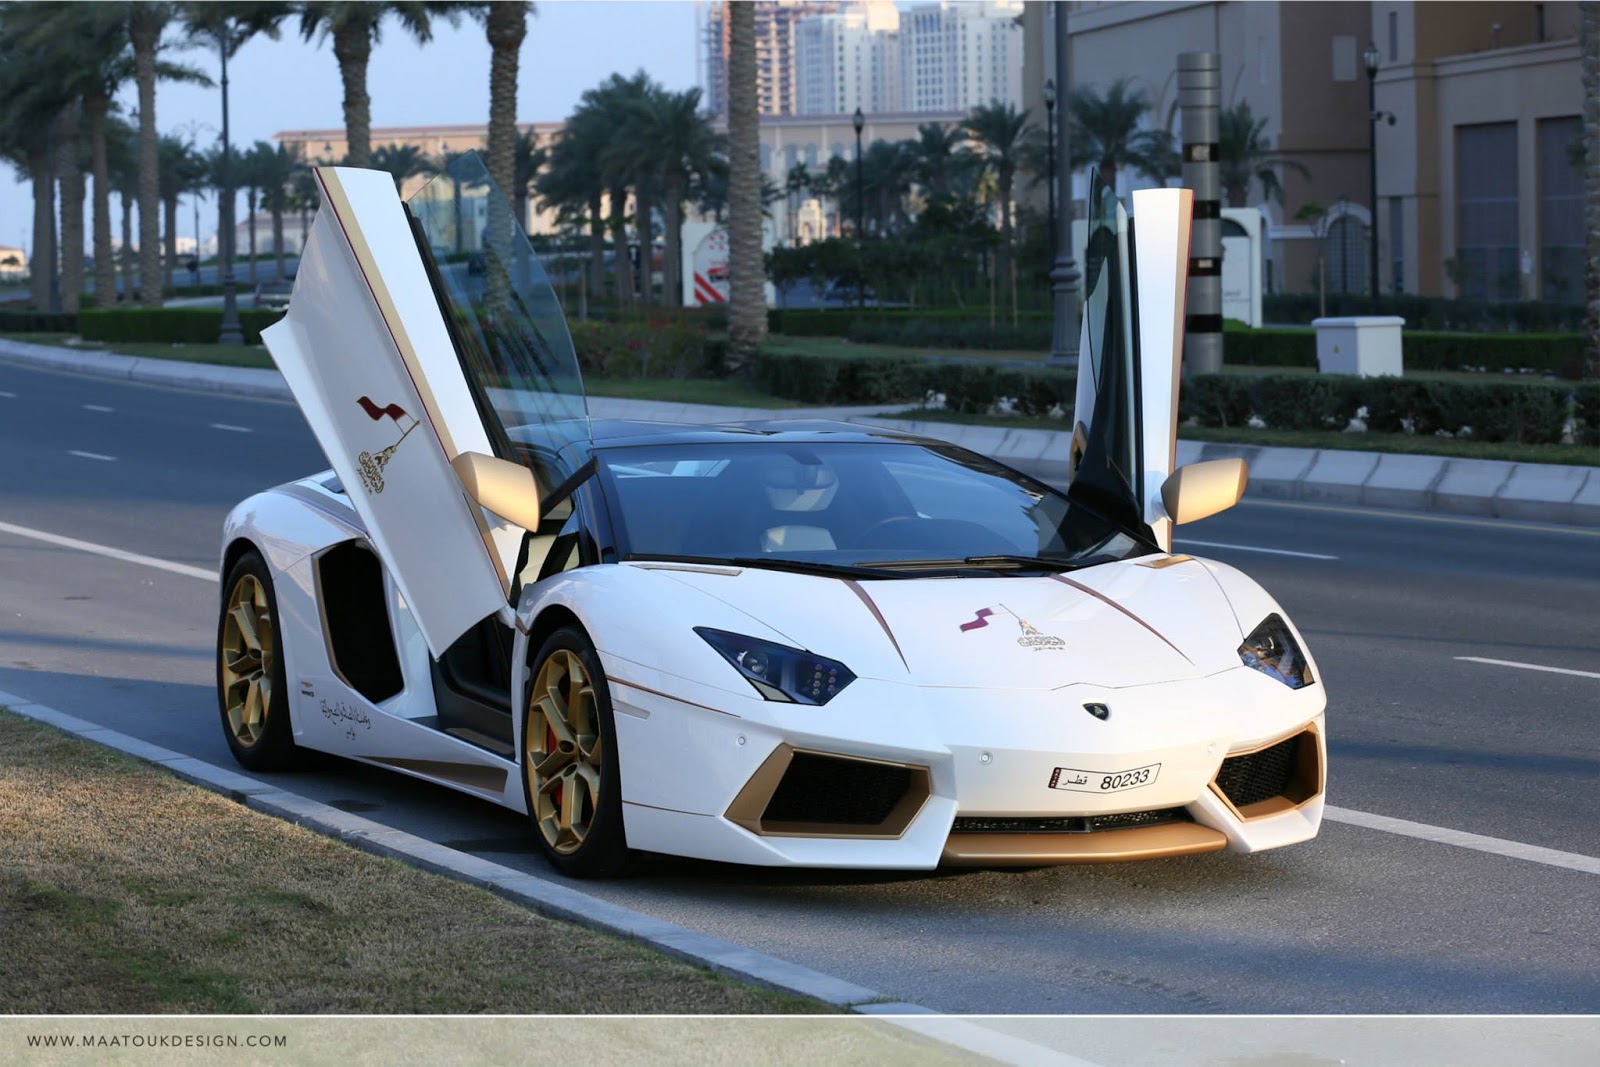 Meet the one-off gold plated Lamborghini Aventador Roadster Qatar National Day Edition1600 x 1067